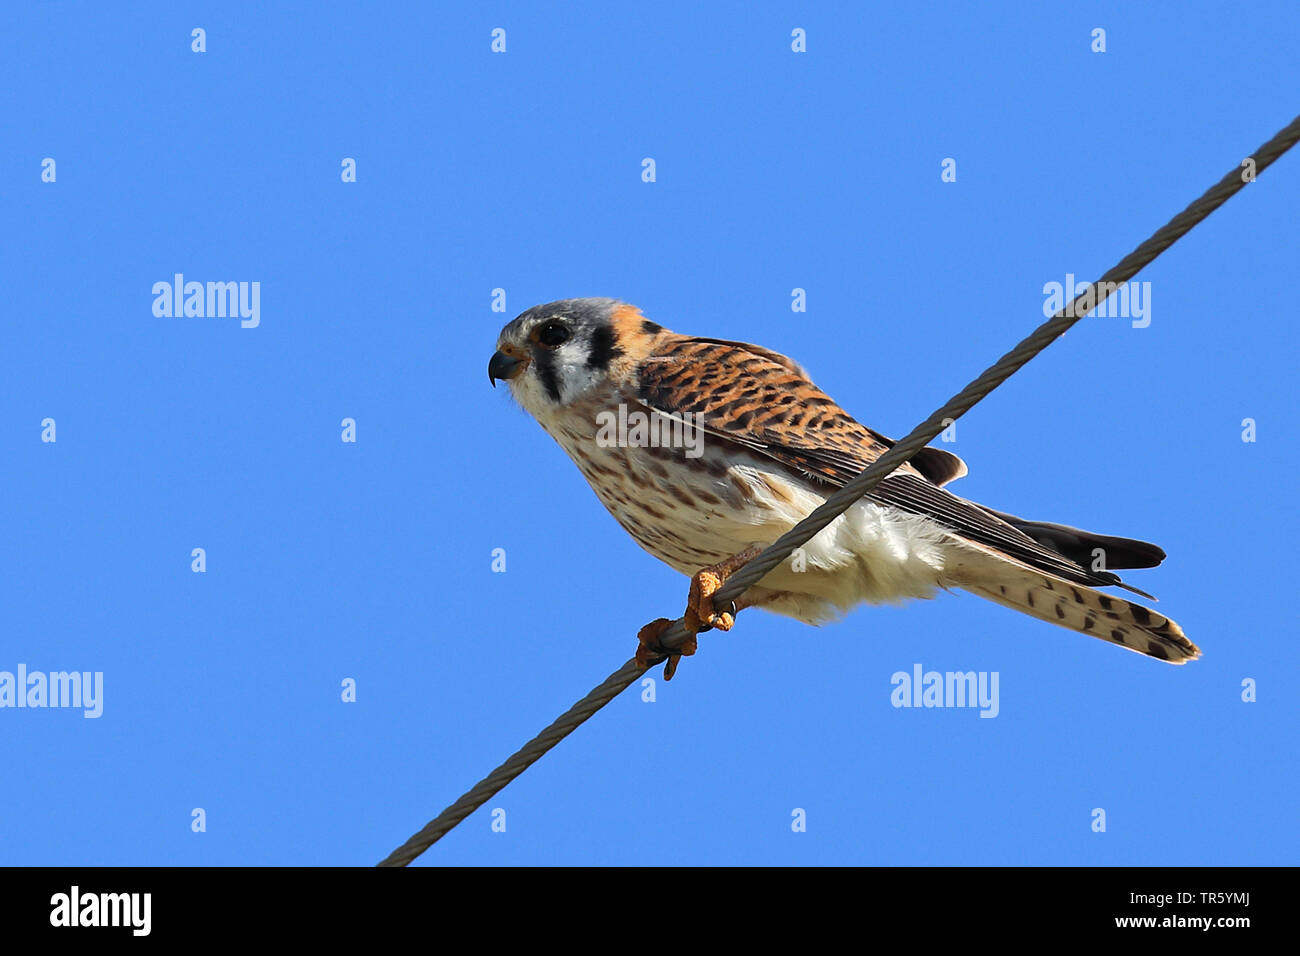 American kestrel (Falco sparverius), male sitting on a cable, USA, Florida, Kissimmee Stock Photo